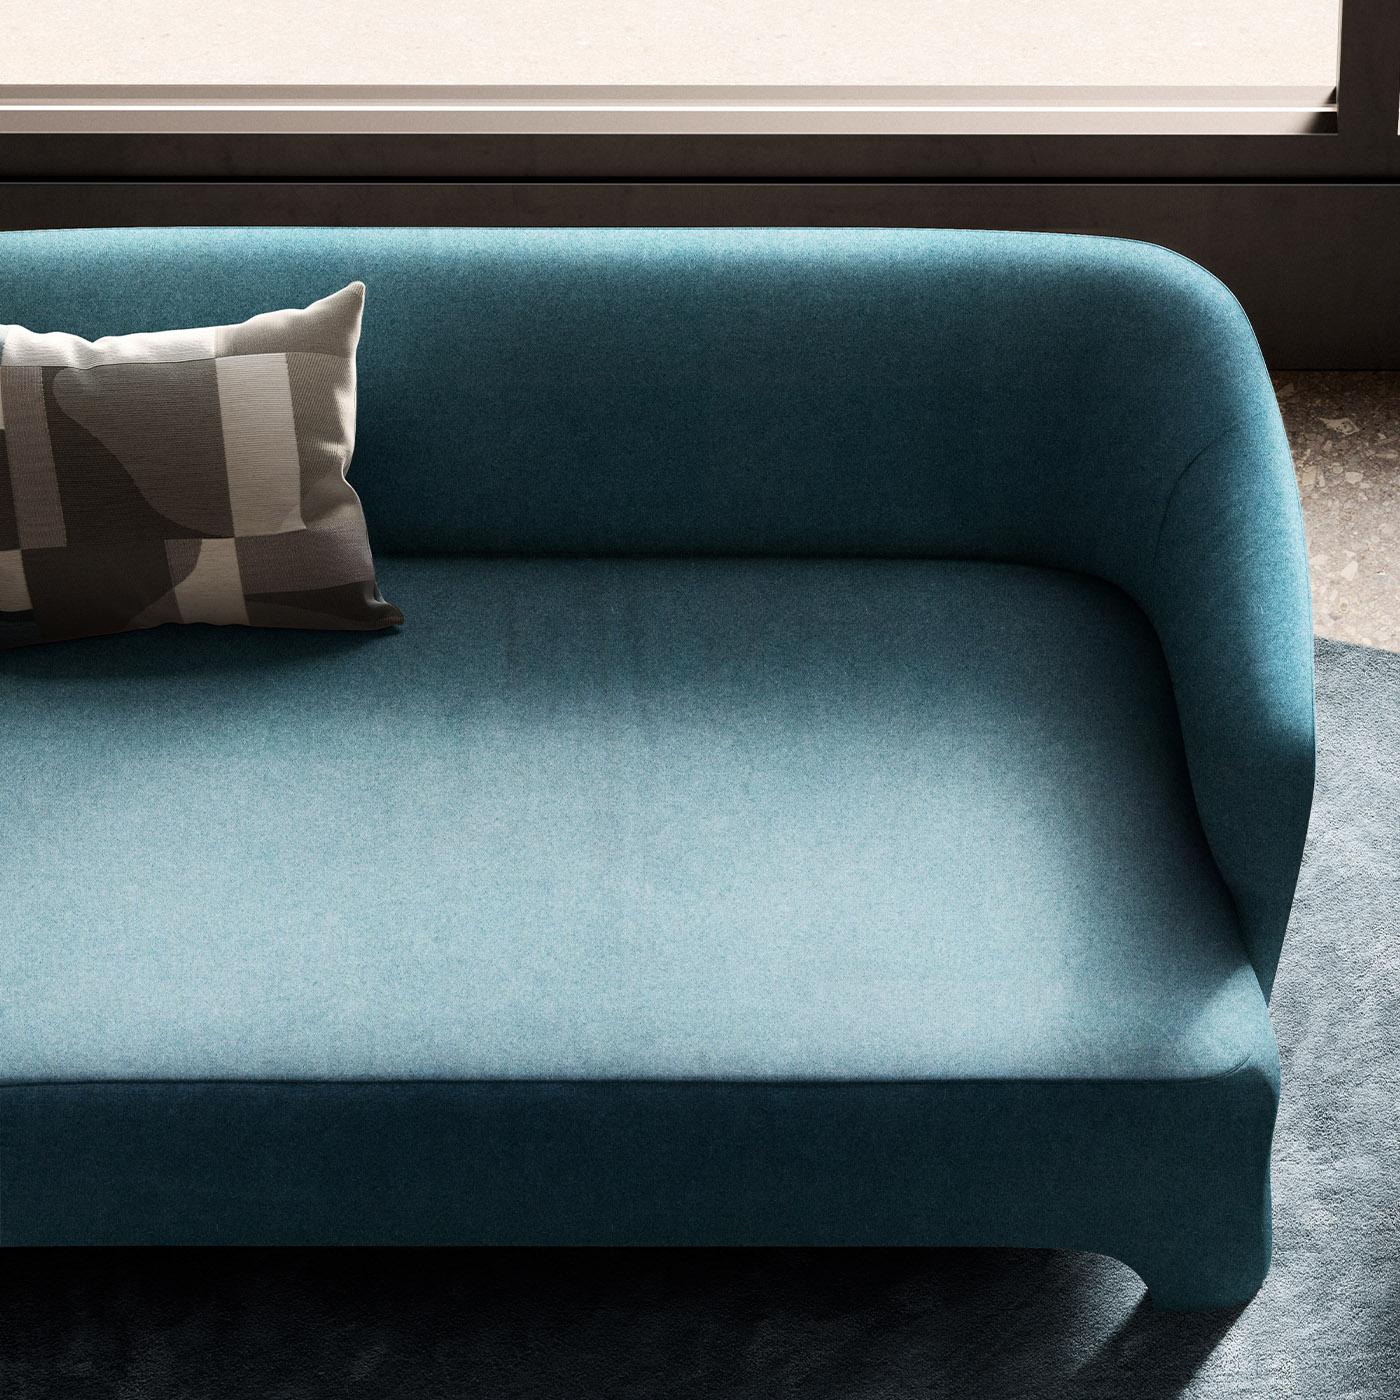 Characterized by a fascinating blue shade of contemporary flair, this sofa is an iconic design by Corrado Corradi Dell'Acqua and an ideal complement to a refined interior. Made of wood and fireproof foam, the structure is entirely upholstered with